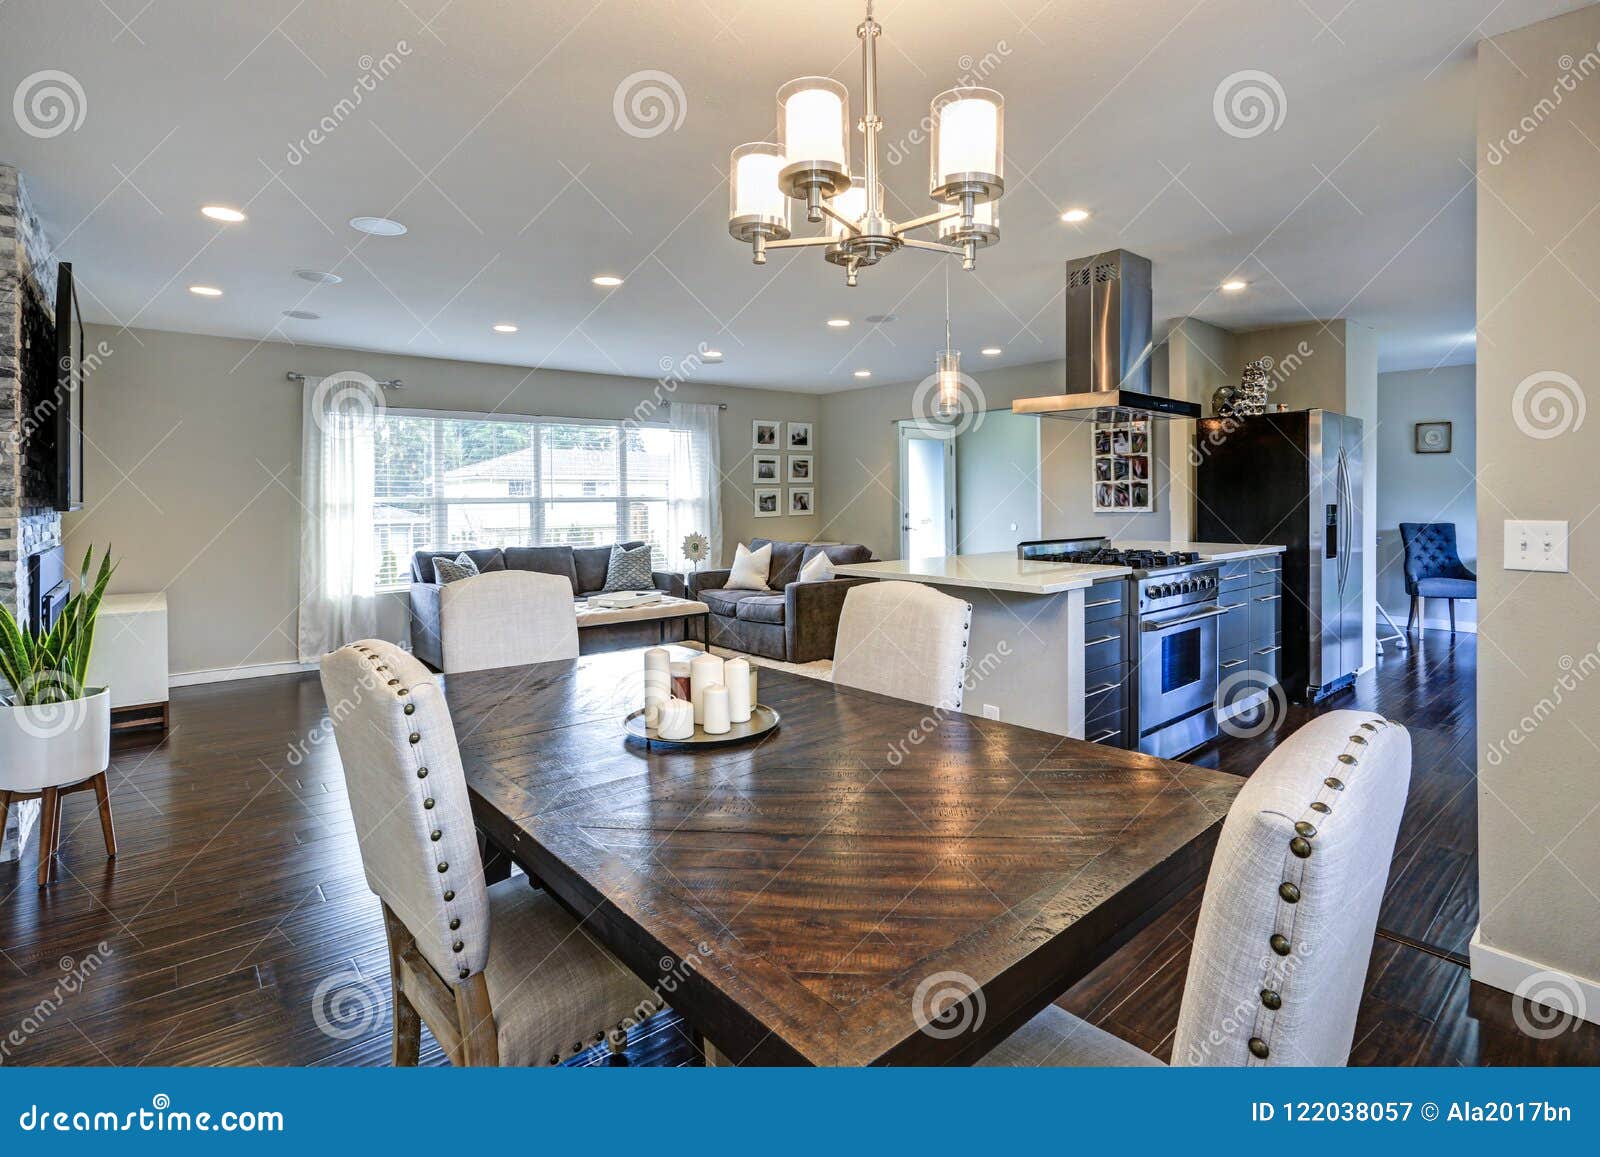 Light and Open Dining Area in One Story Rambler. Stock Image - Image of ...